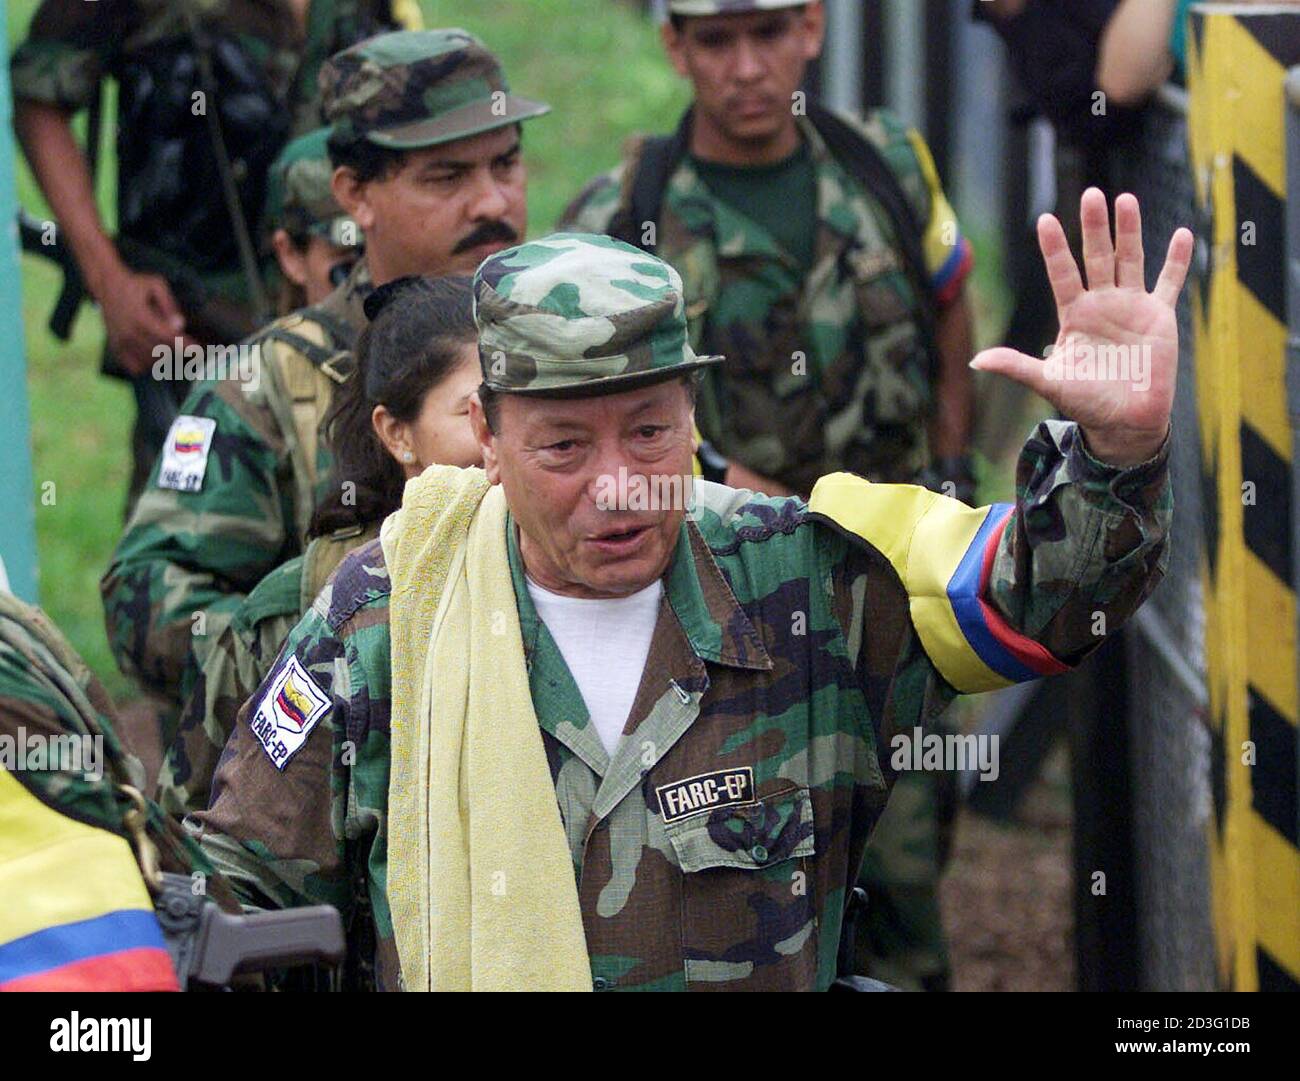 FARC rebel commander Manuel Marulanda known as "Sureshot" greets supporters  as he arrives for a peace meeting in Los Pozos, Caqueta province, March 8,  2001. With the absence of the United States,